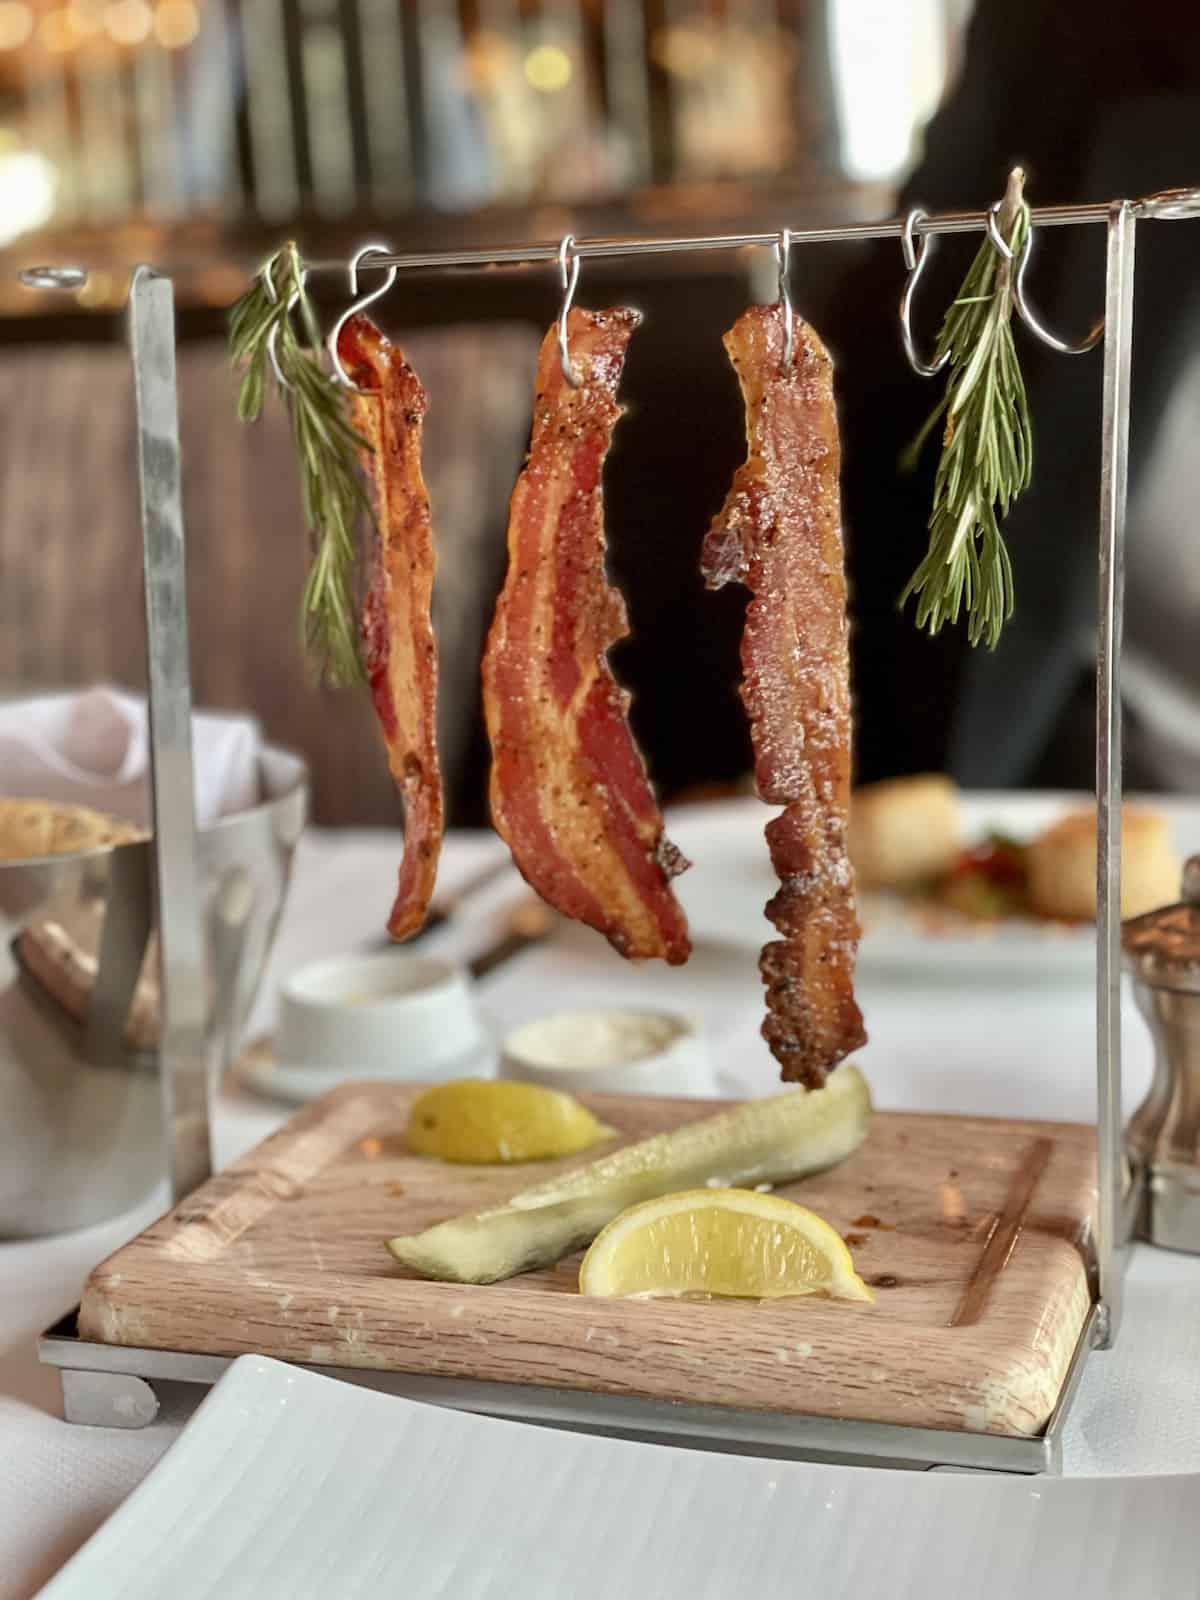 Bacon on a mini clothes line.